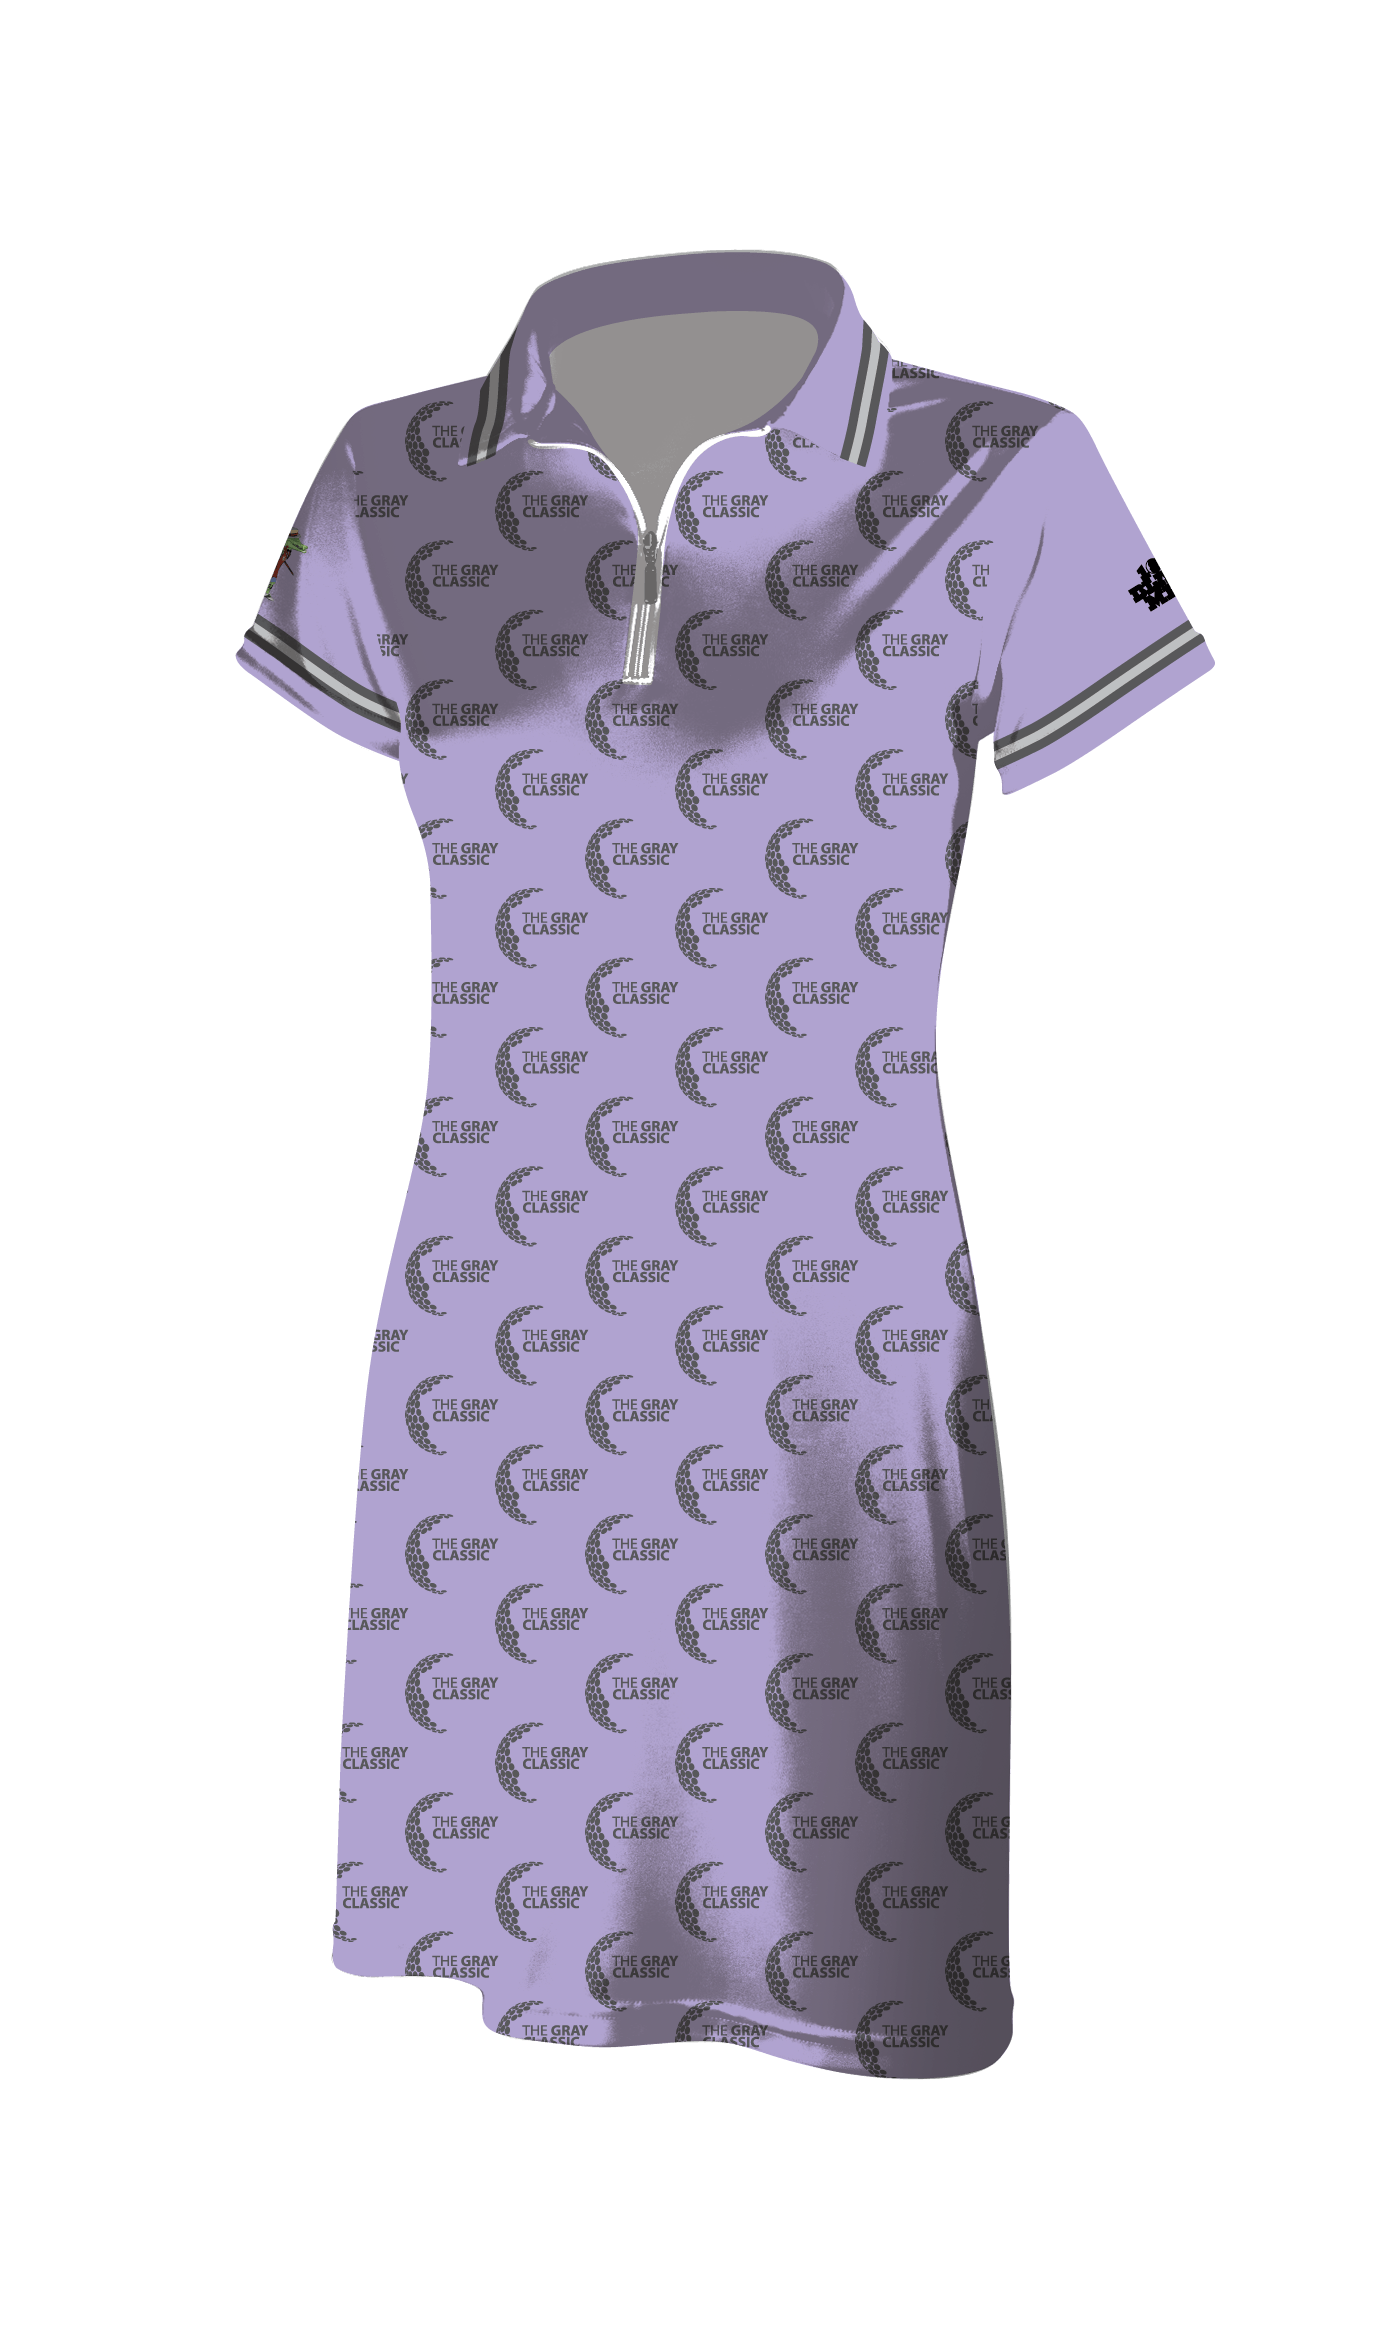 Lavender Polo Logo - Tatted Croc GRAY CLASSIC LADIES LOGO REPEAT ON LAVENDER POLO DRESS